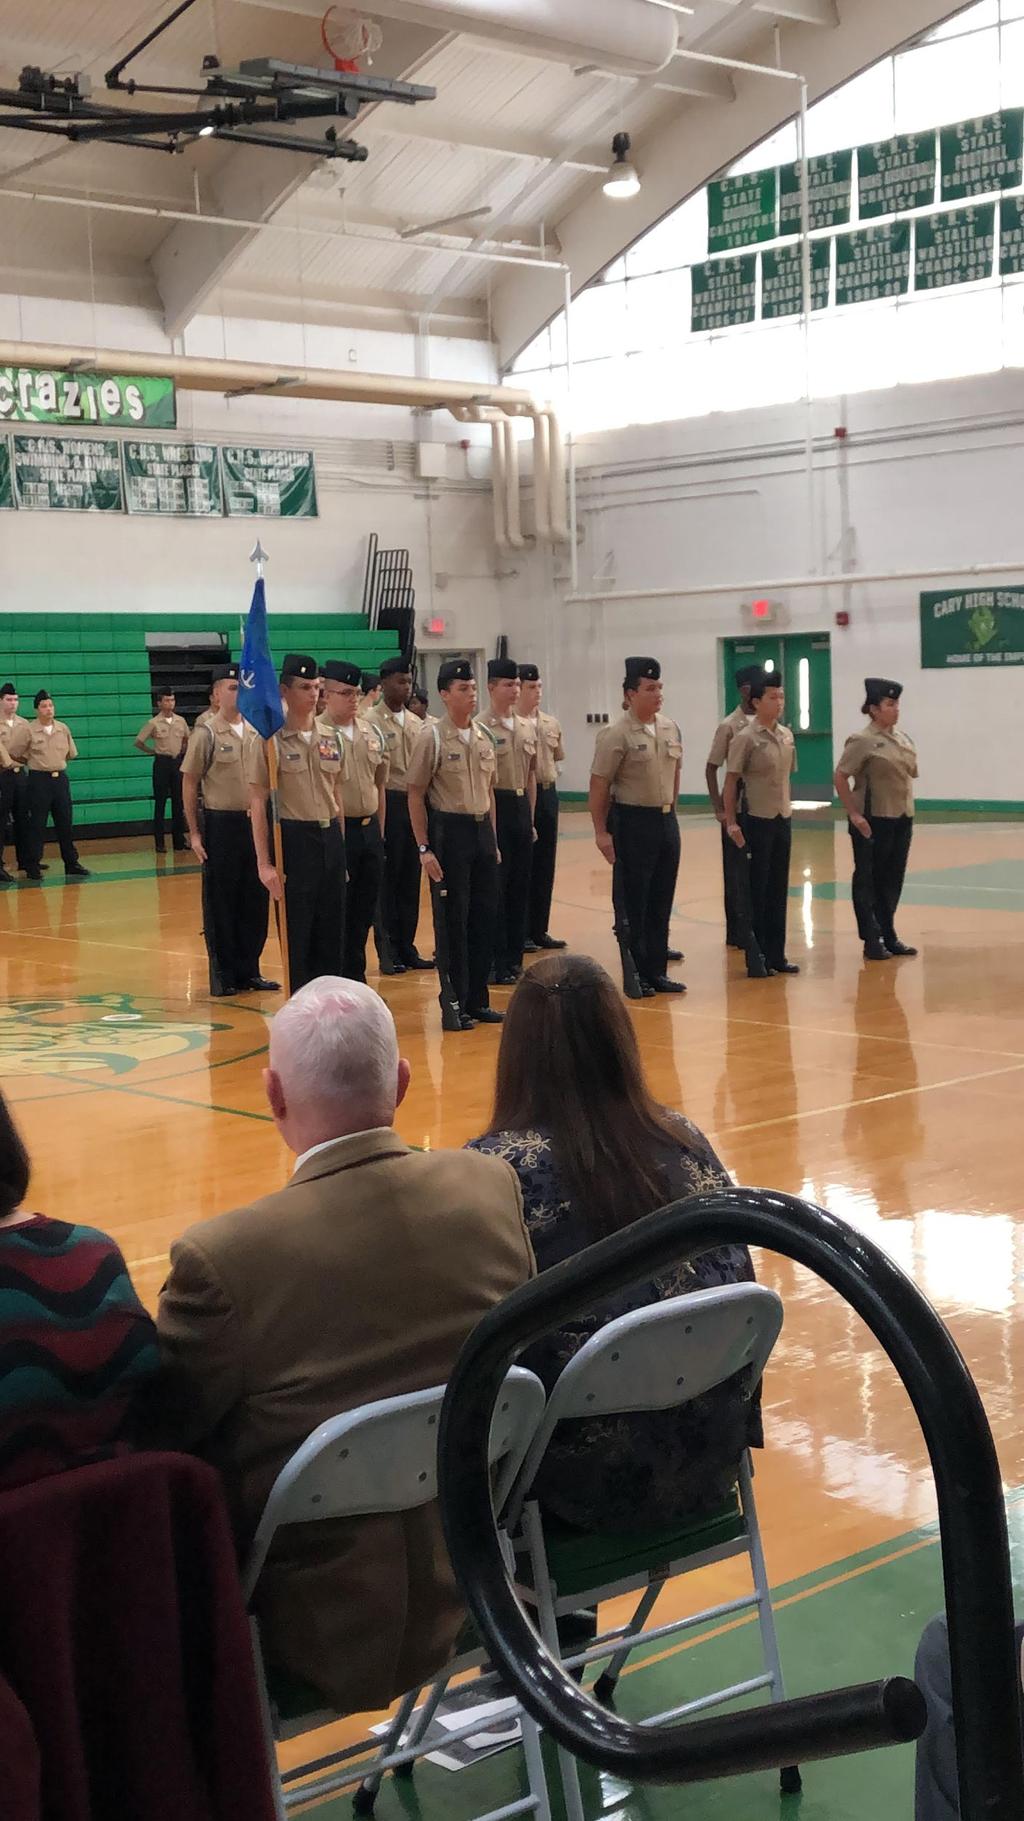 Cary High School s NJROTC Unit has received the Distinguished Unit Award for the past 18 years in a row.